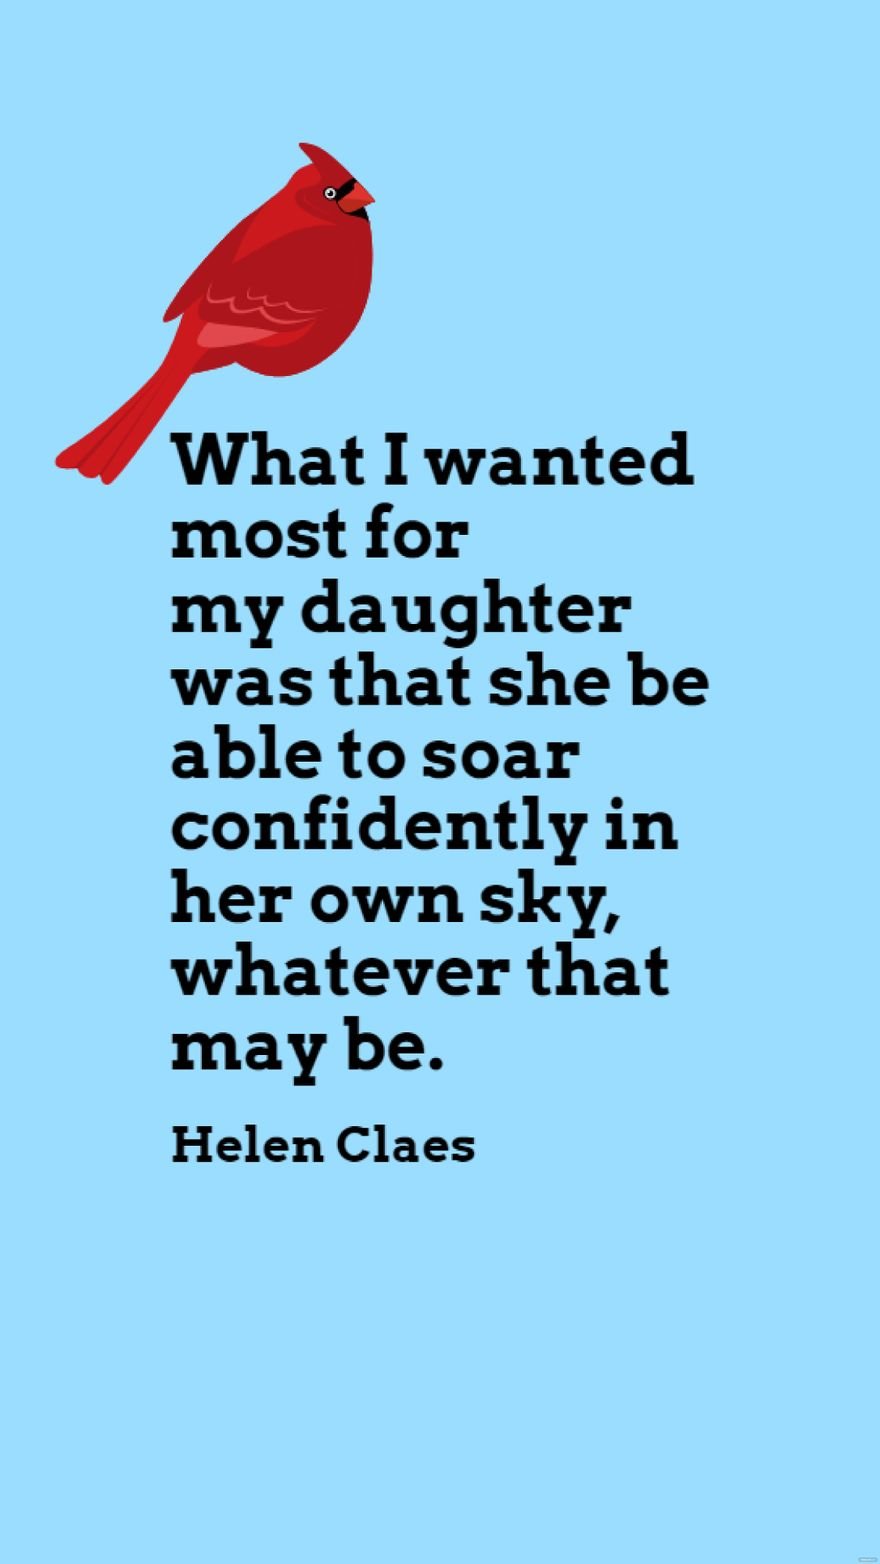 Helen Claes - What I wanted most for my daughter was that she be able to soar confidently in her own sky, whatever that may be.